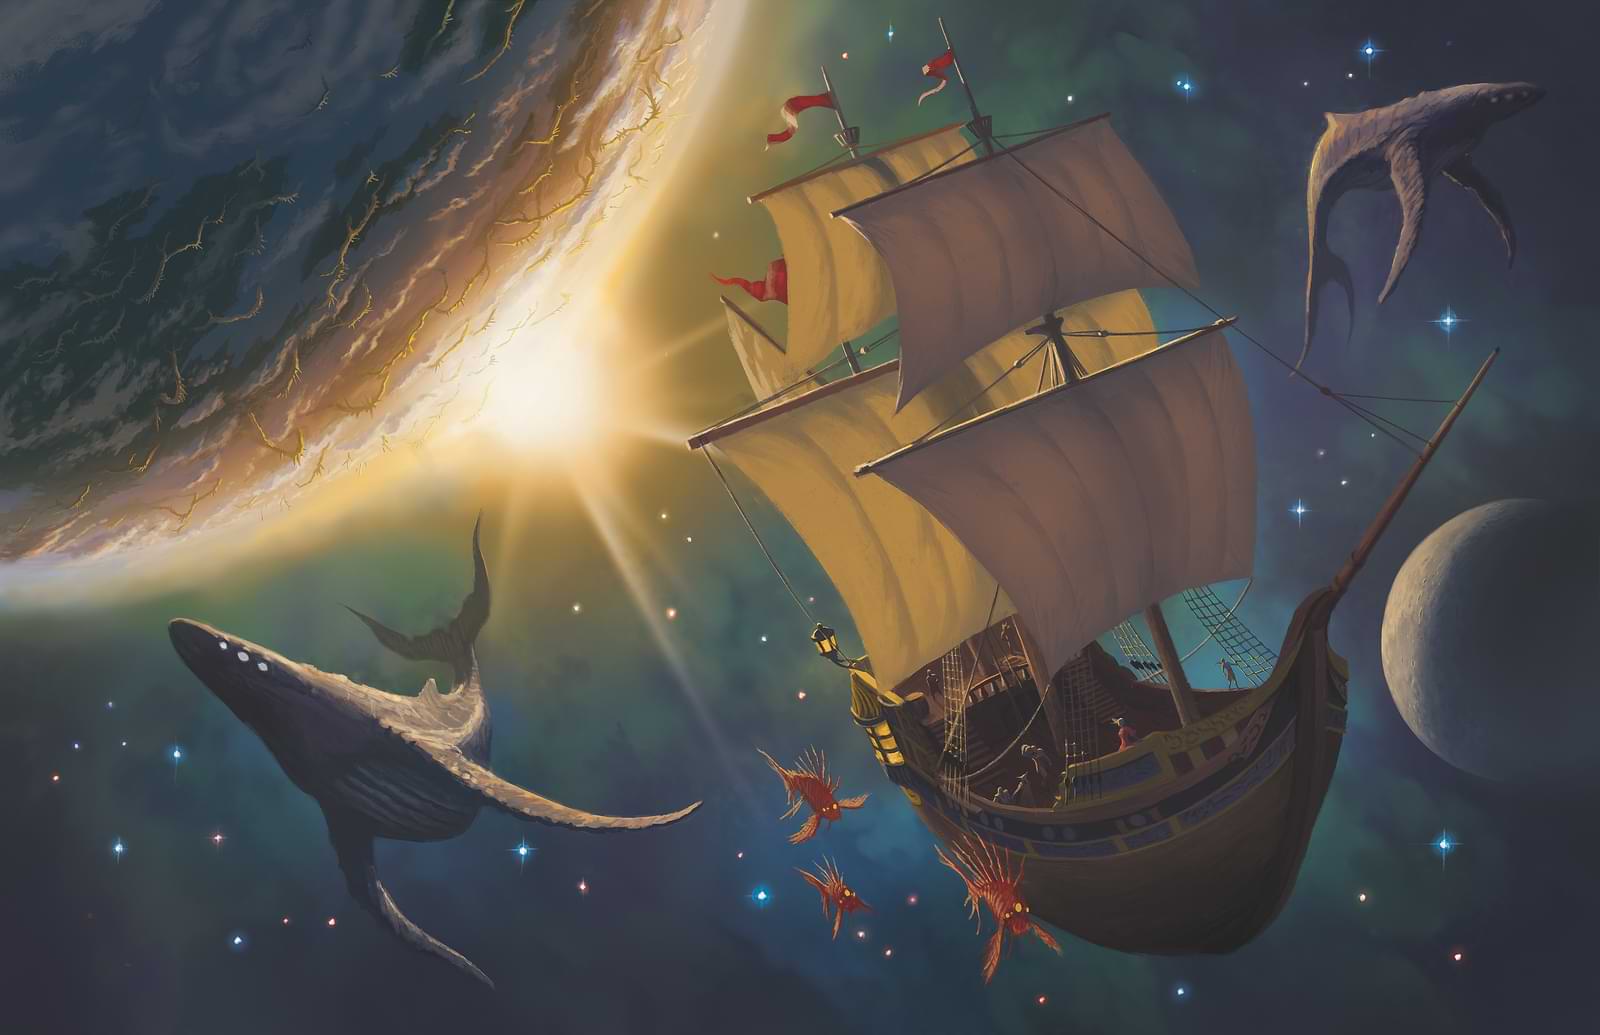 A ship in space with alien whales and fish flying alongside it